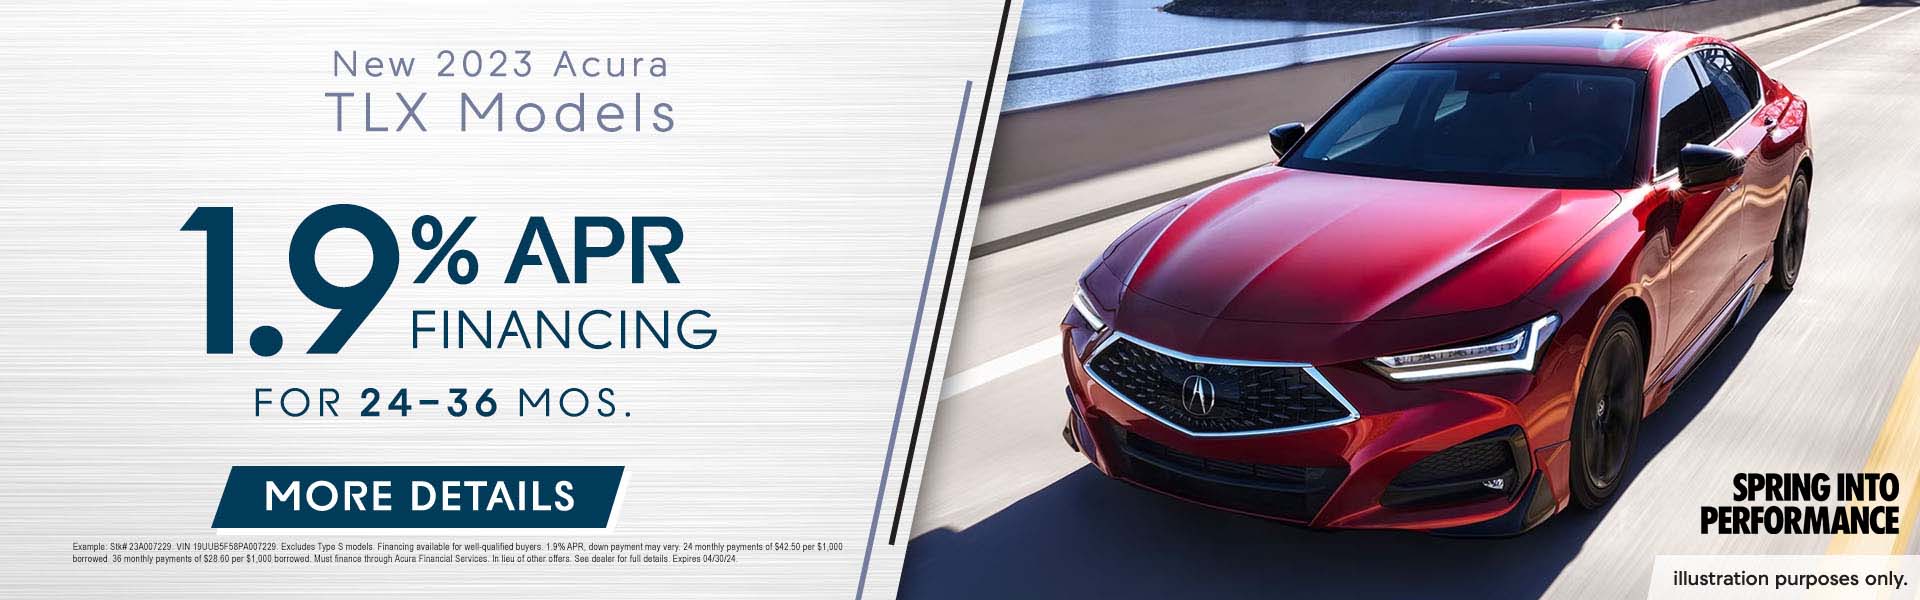 New 2023 Acura TLX Models